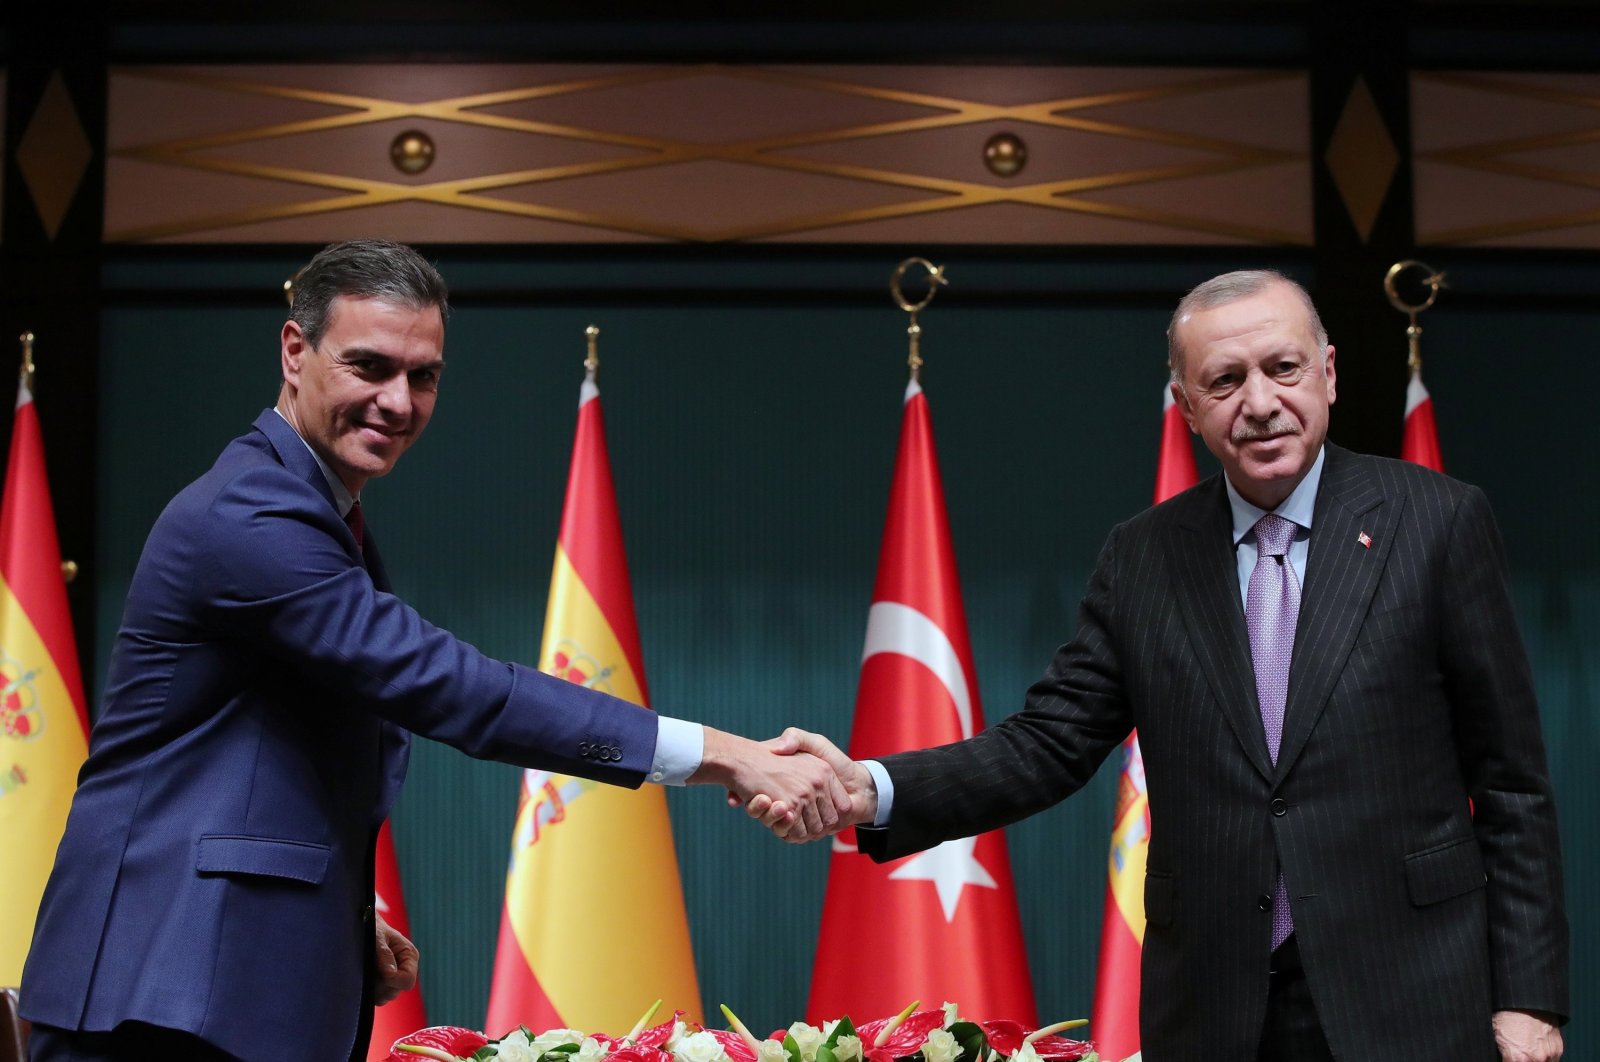 President Recep Tayyip Erdoğan and Spain&#039;s Prime Minister Pedro Sanchez (L) shake hands during a news conference in the capital Ankara, Turkey, Nov. 17, 2021. (Reuters Photo)